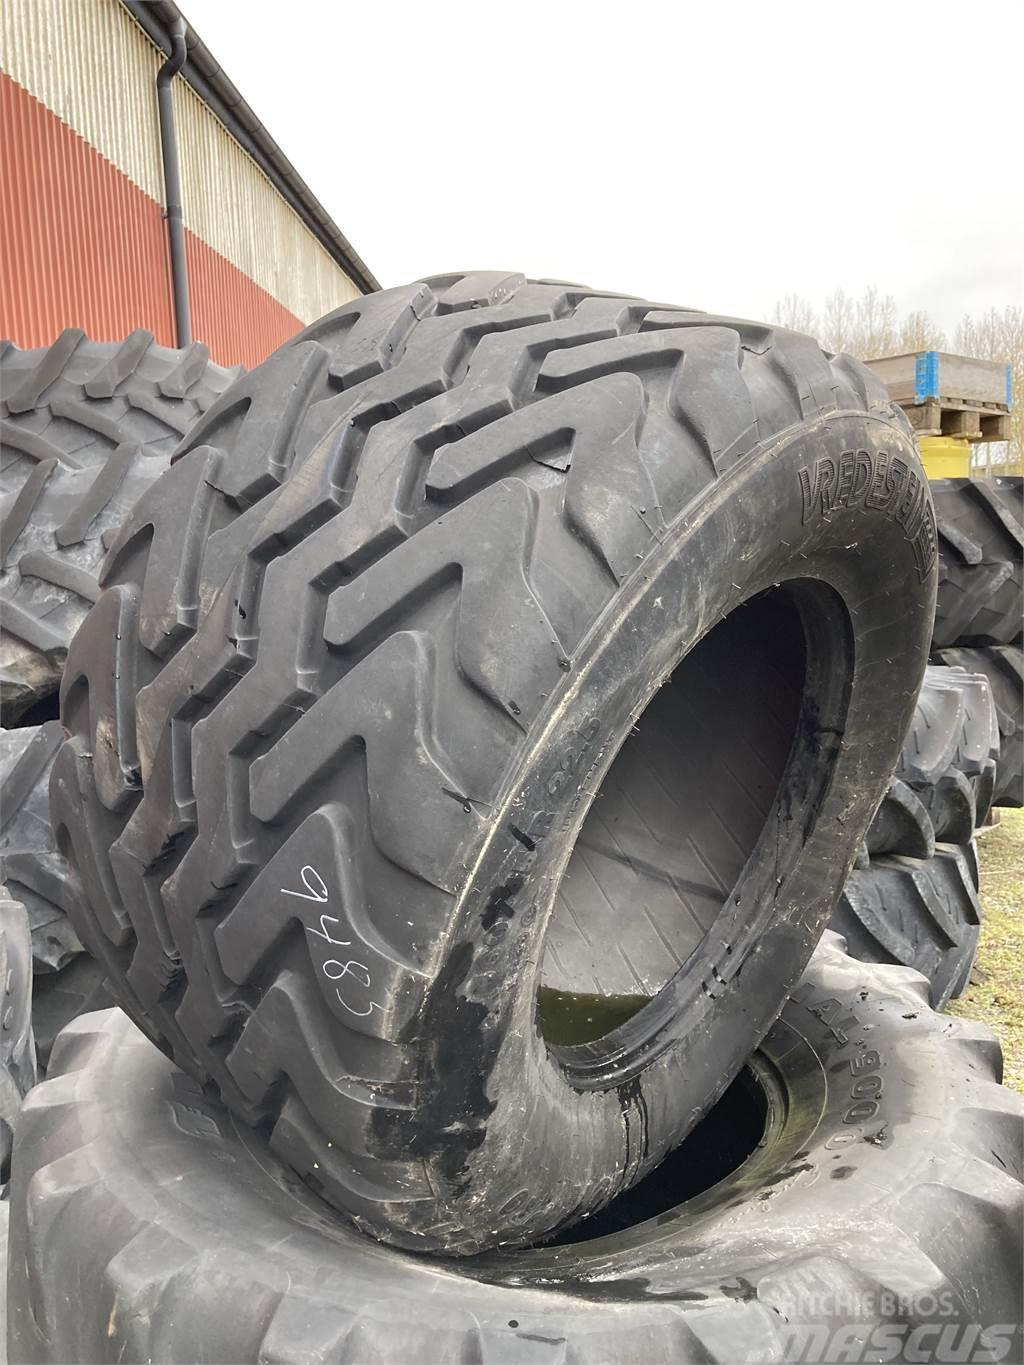  560/45X22,5 Tyres, wheels and rims